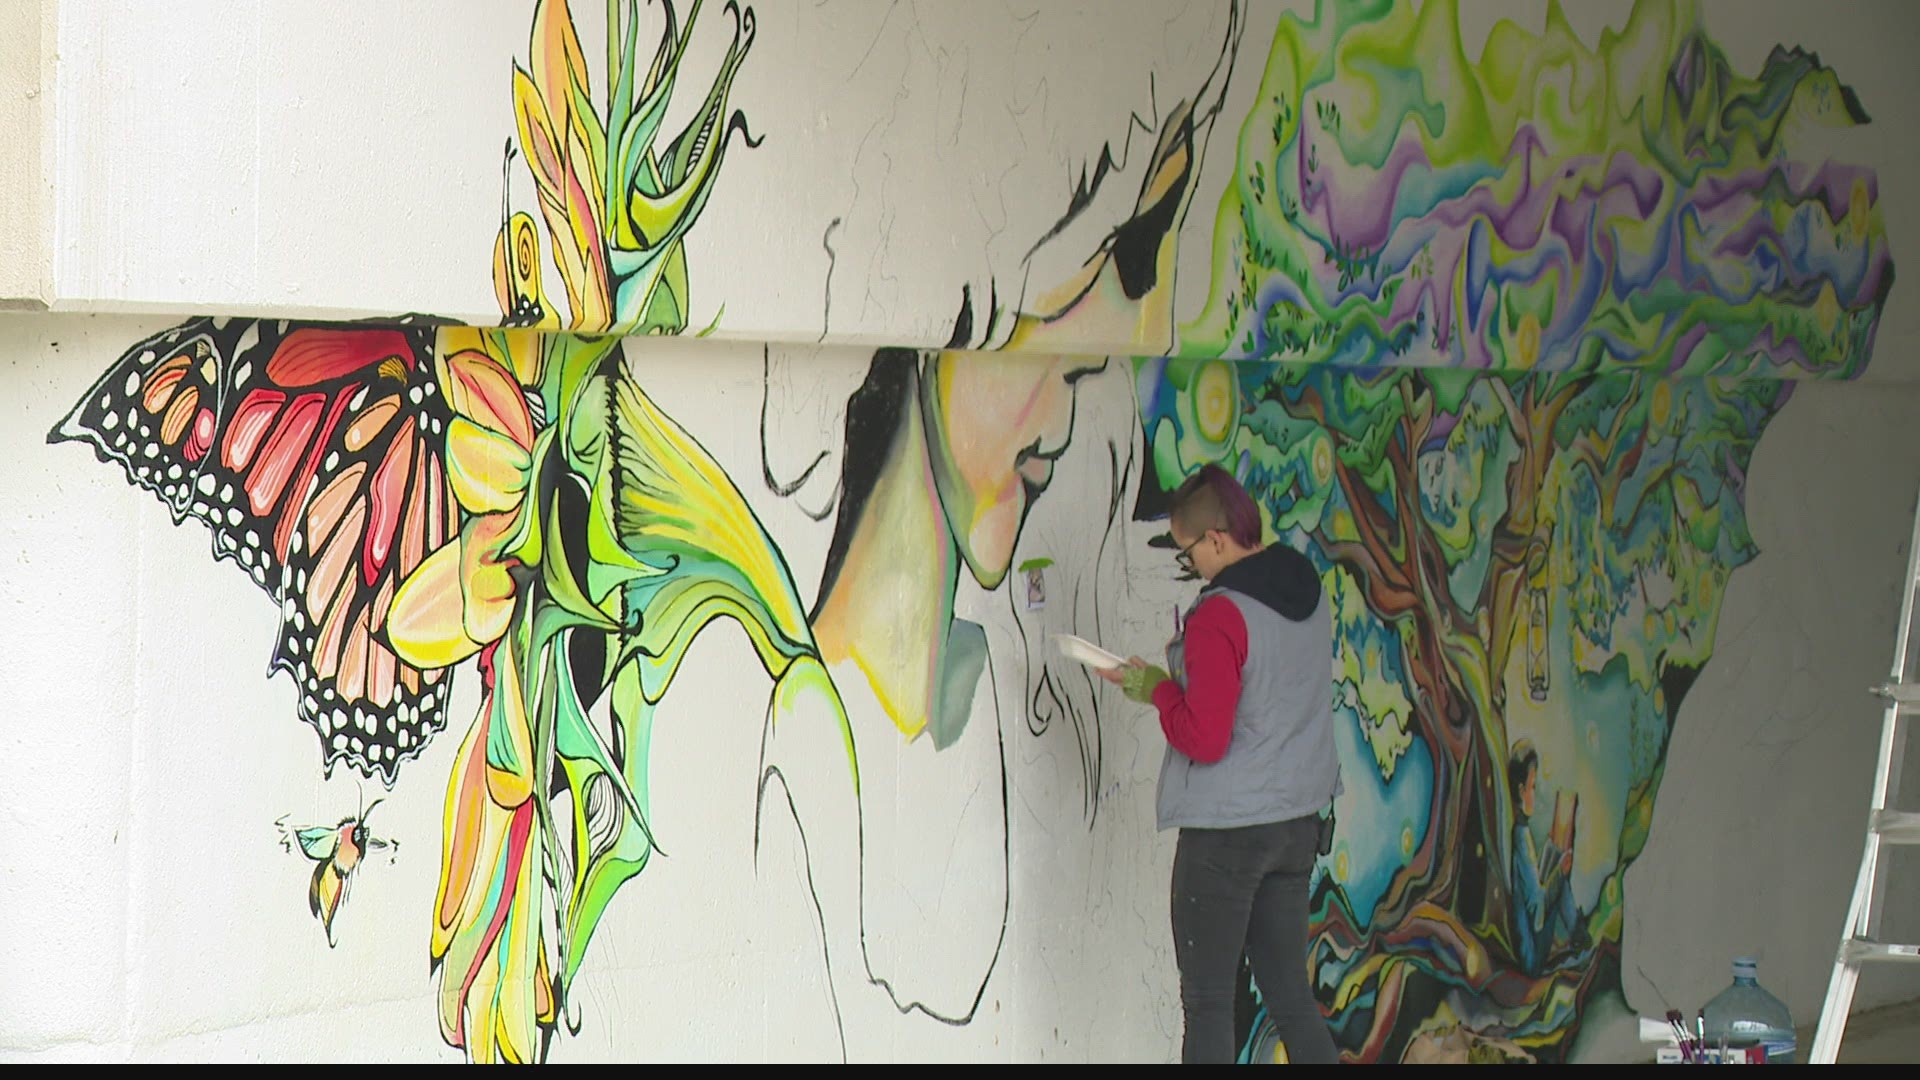 Meredith is introducing us to a muralist who's turning an underpass into a beautiful destination.